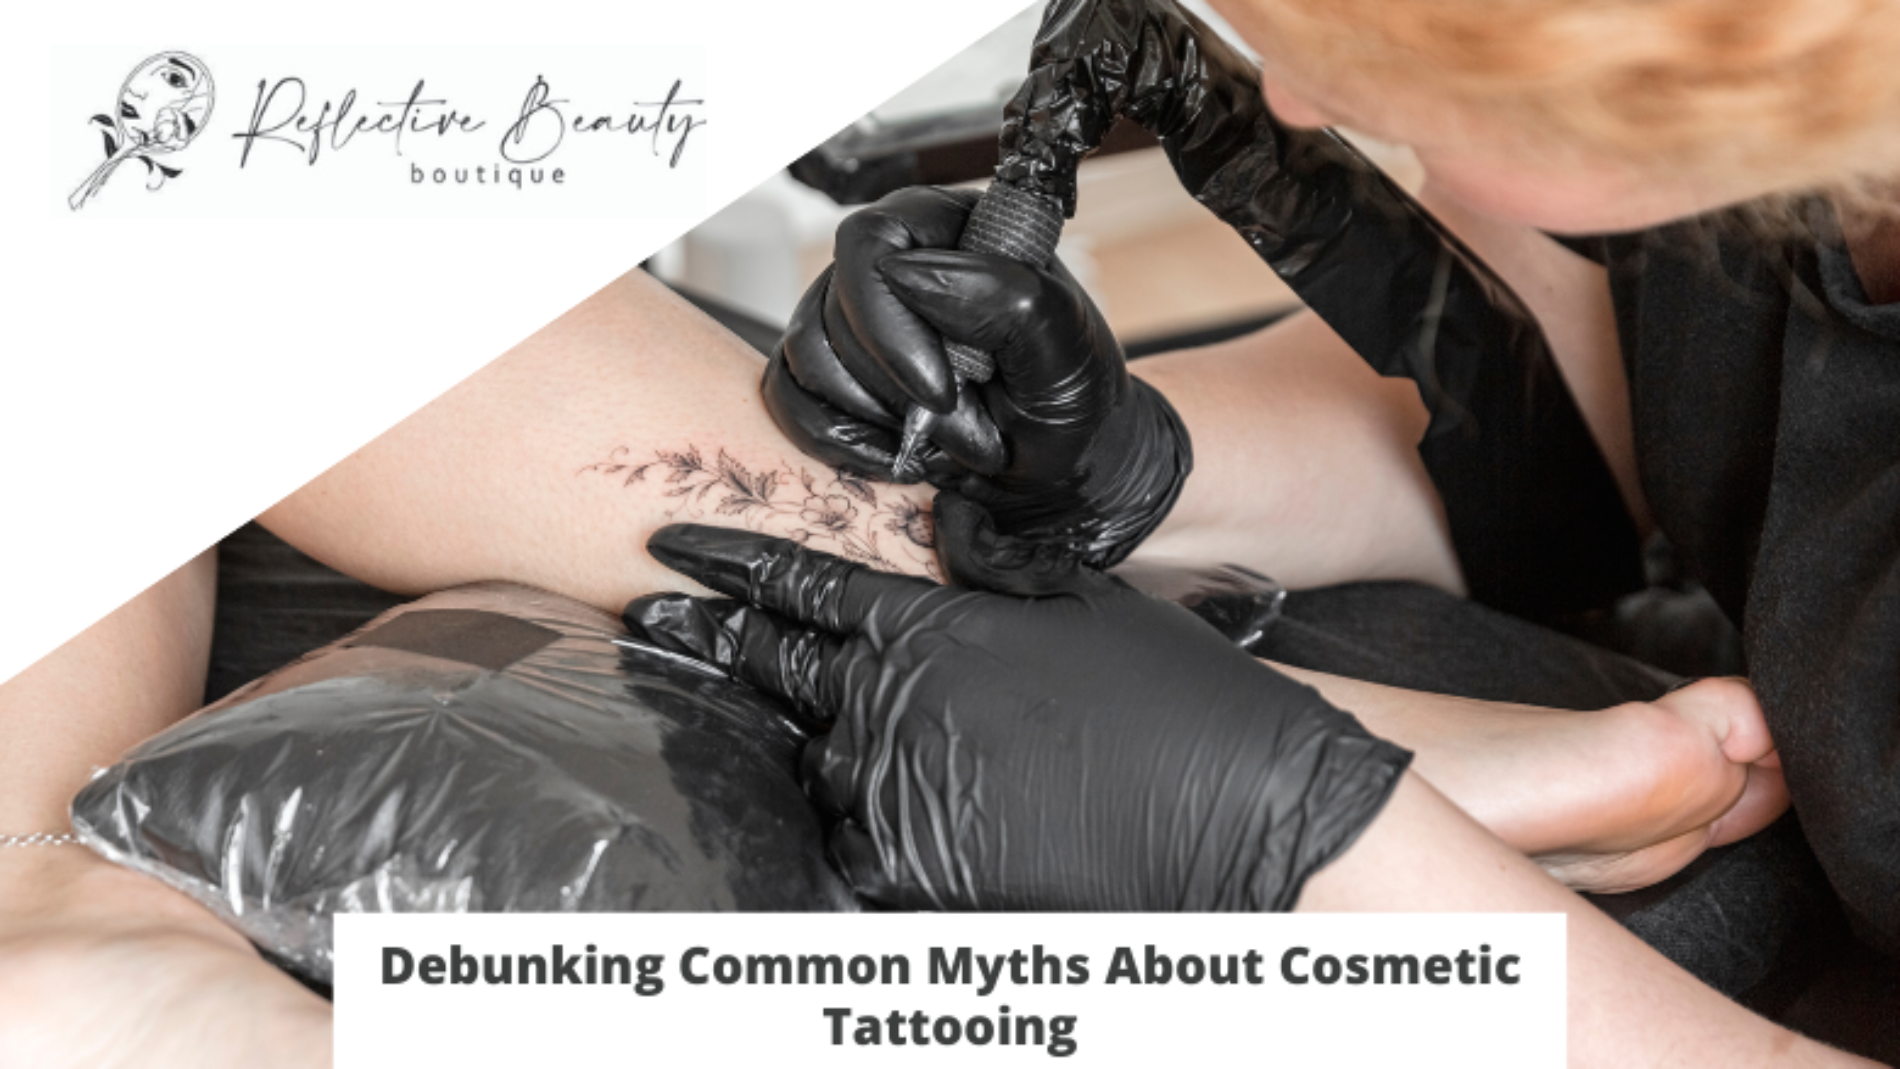 Debunking Common Myths About Cosmetic Tattooing